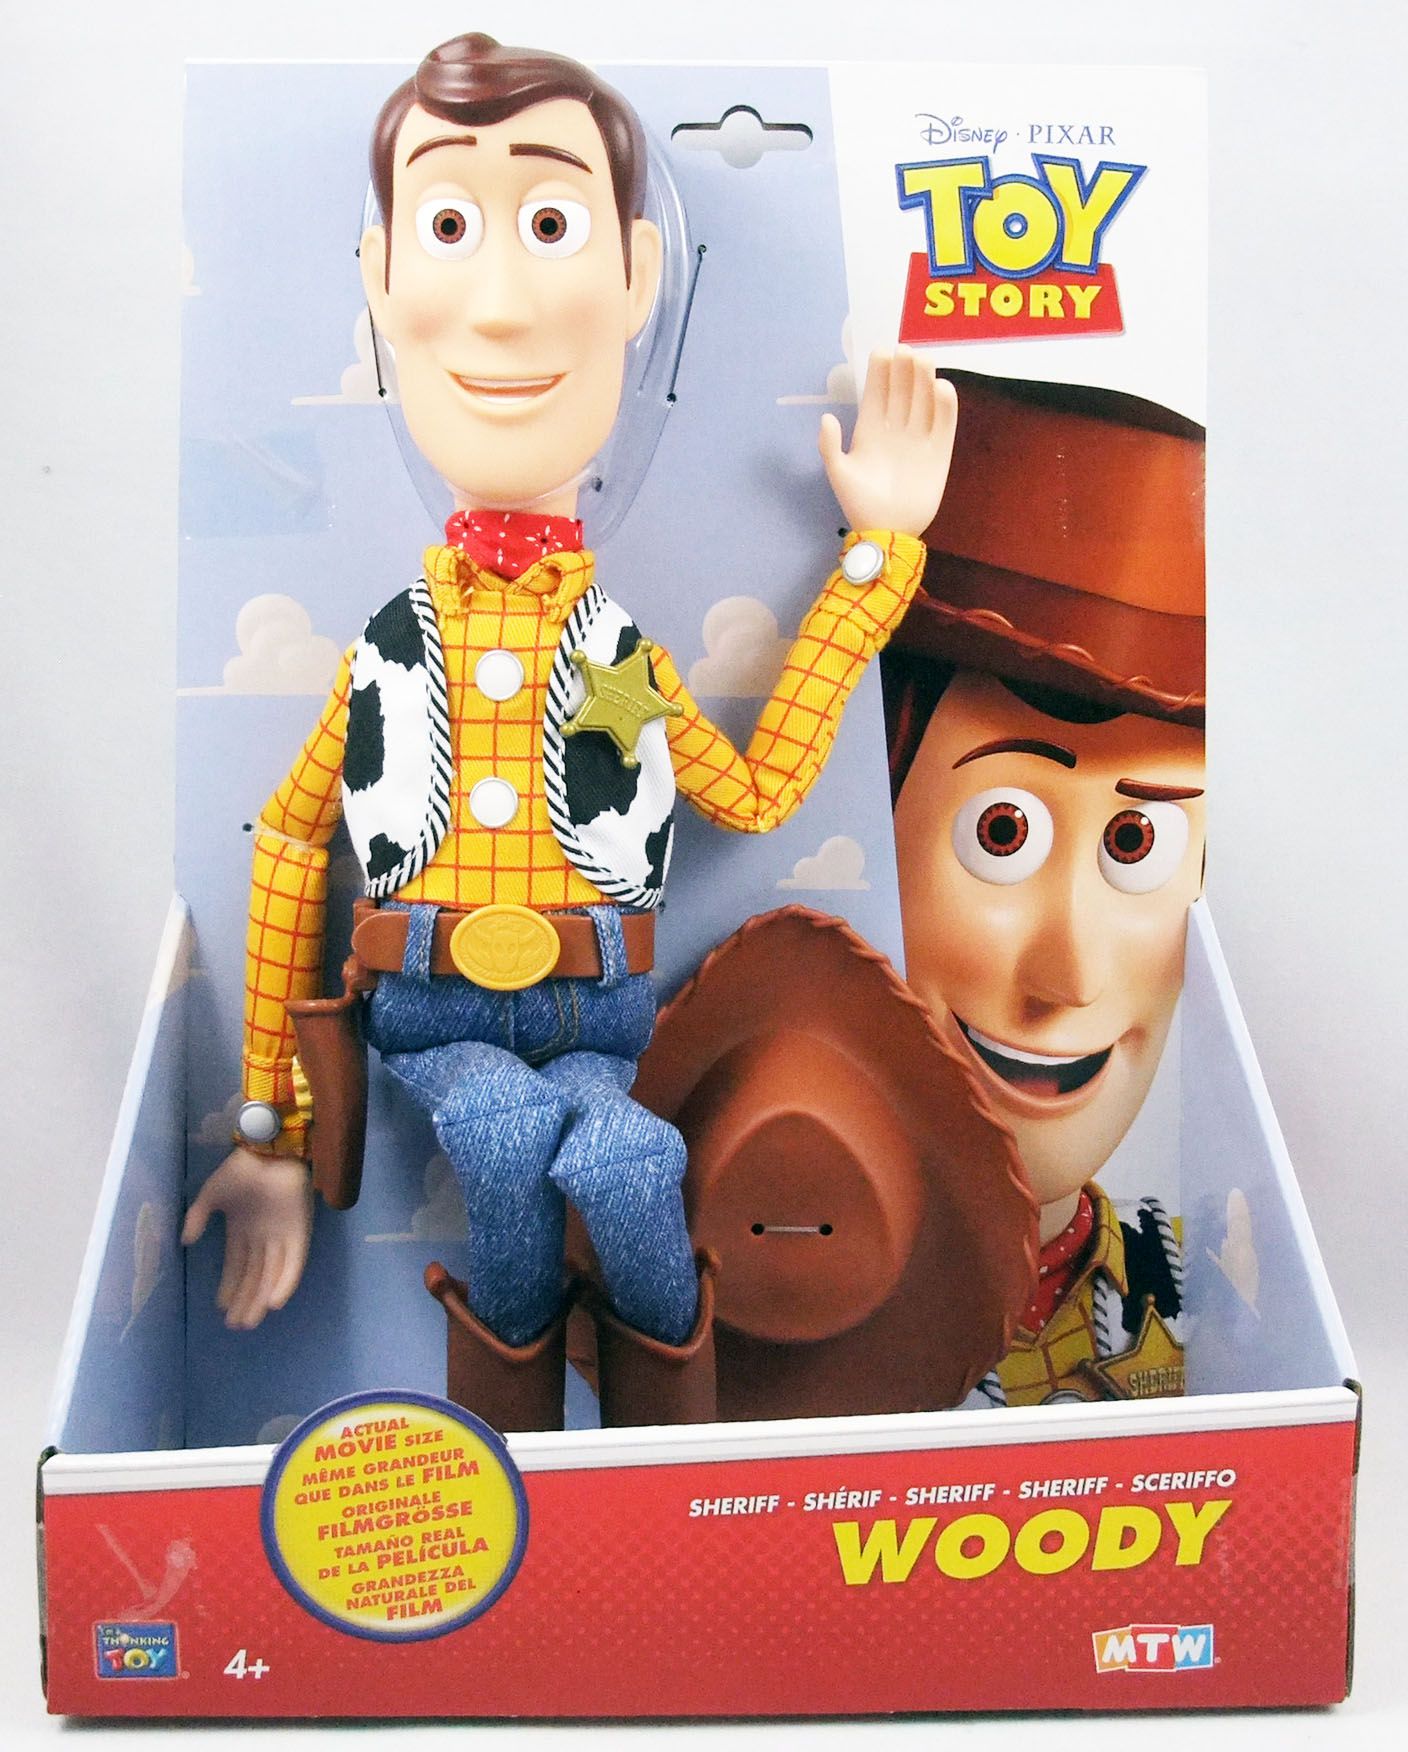 Disney Toy Story 3 Plush Toy Woody Talking Action figure Doll Figure 15"